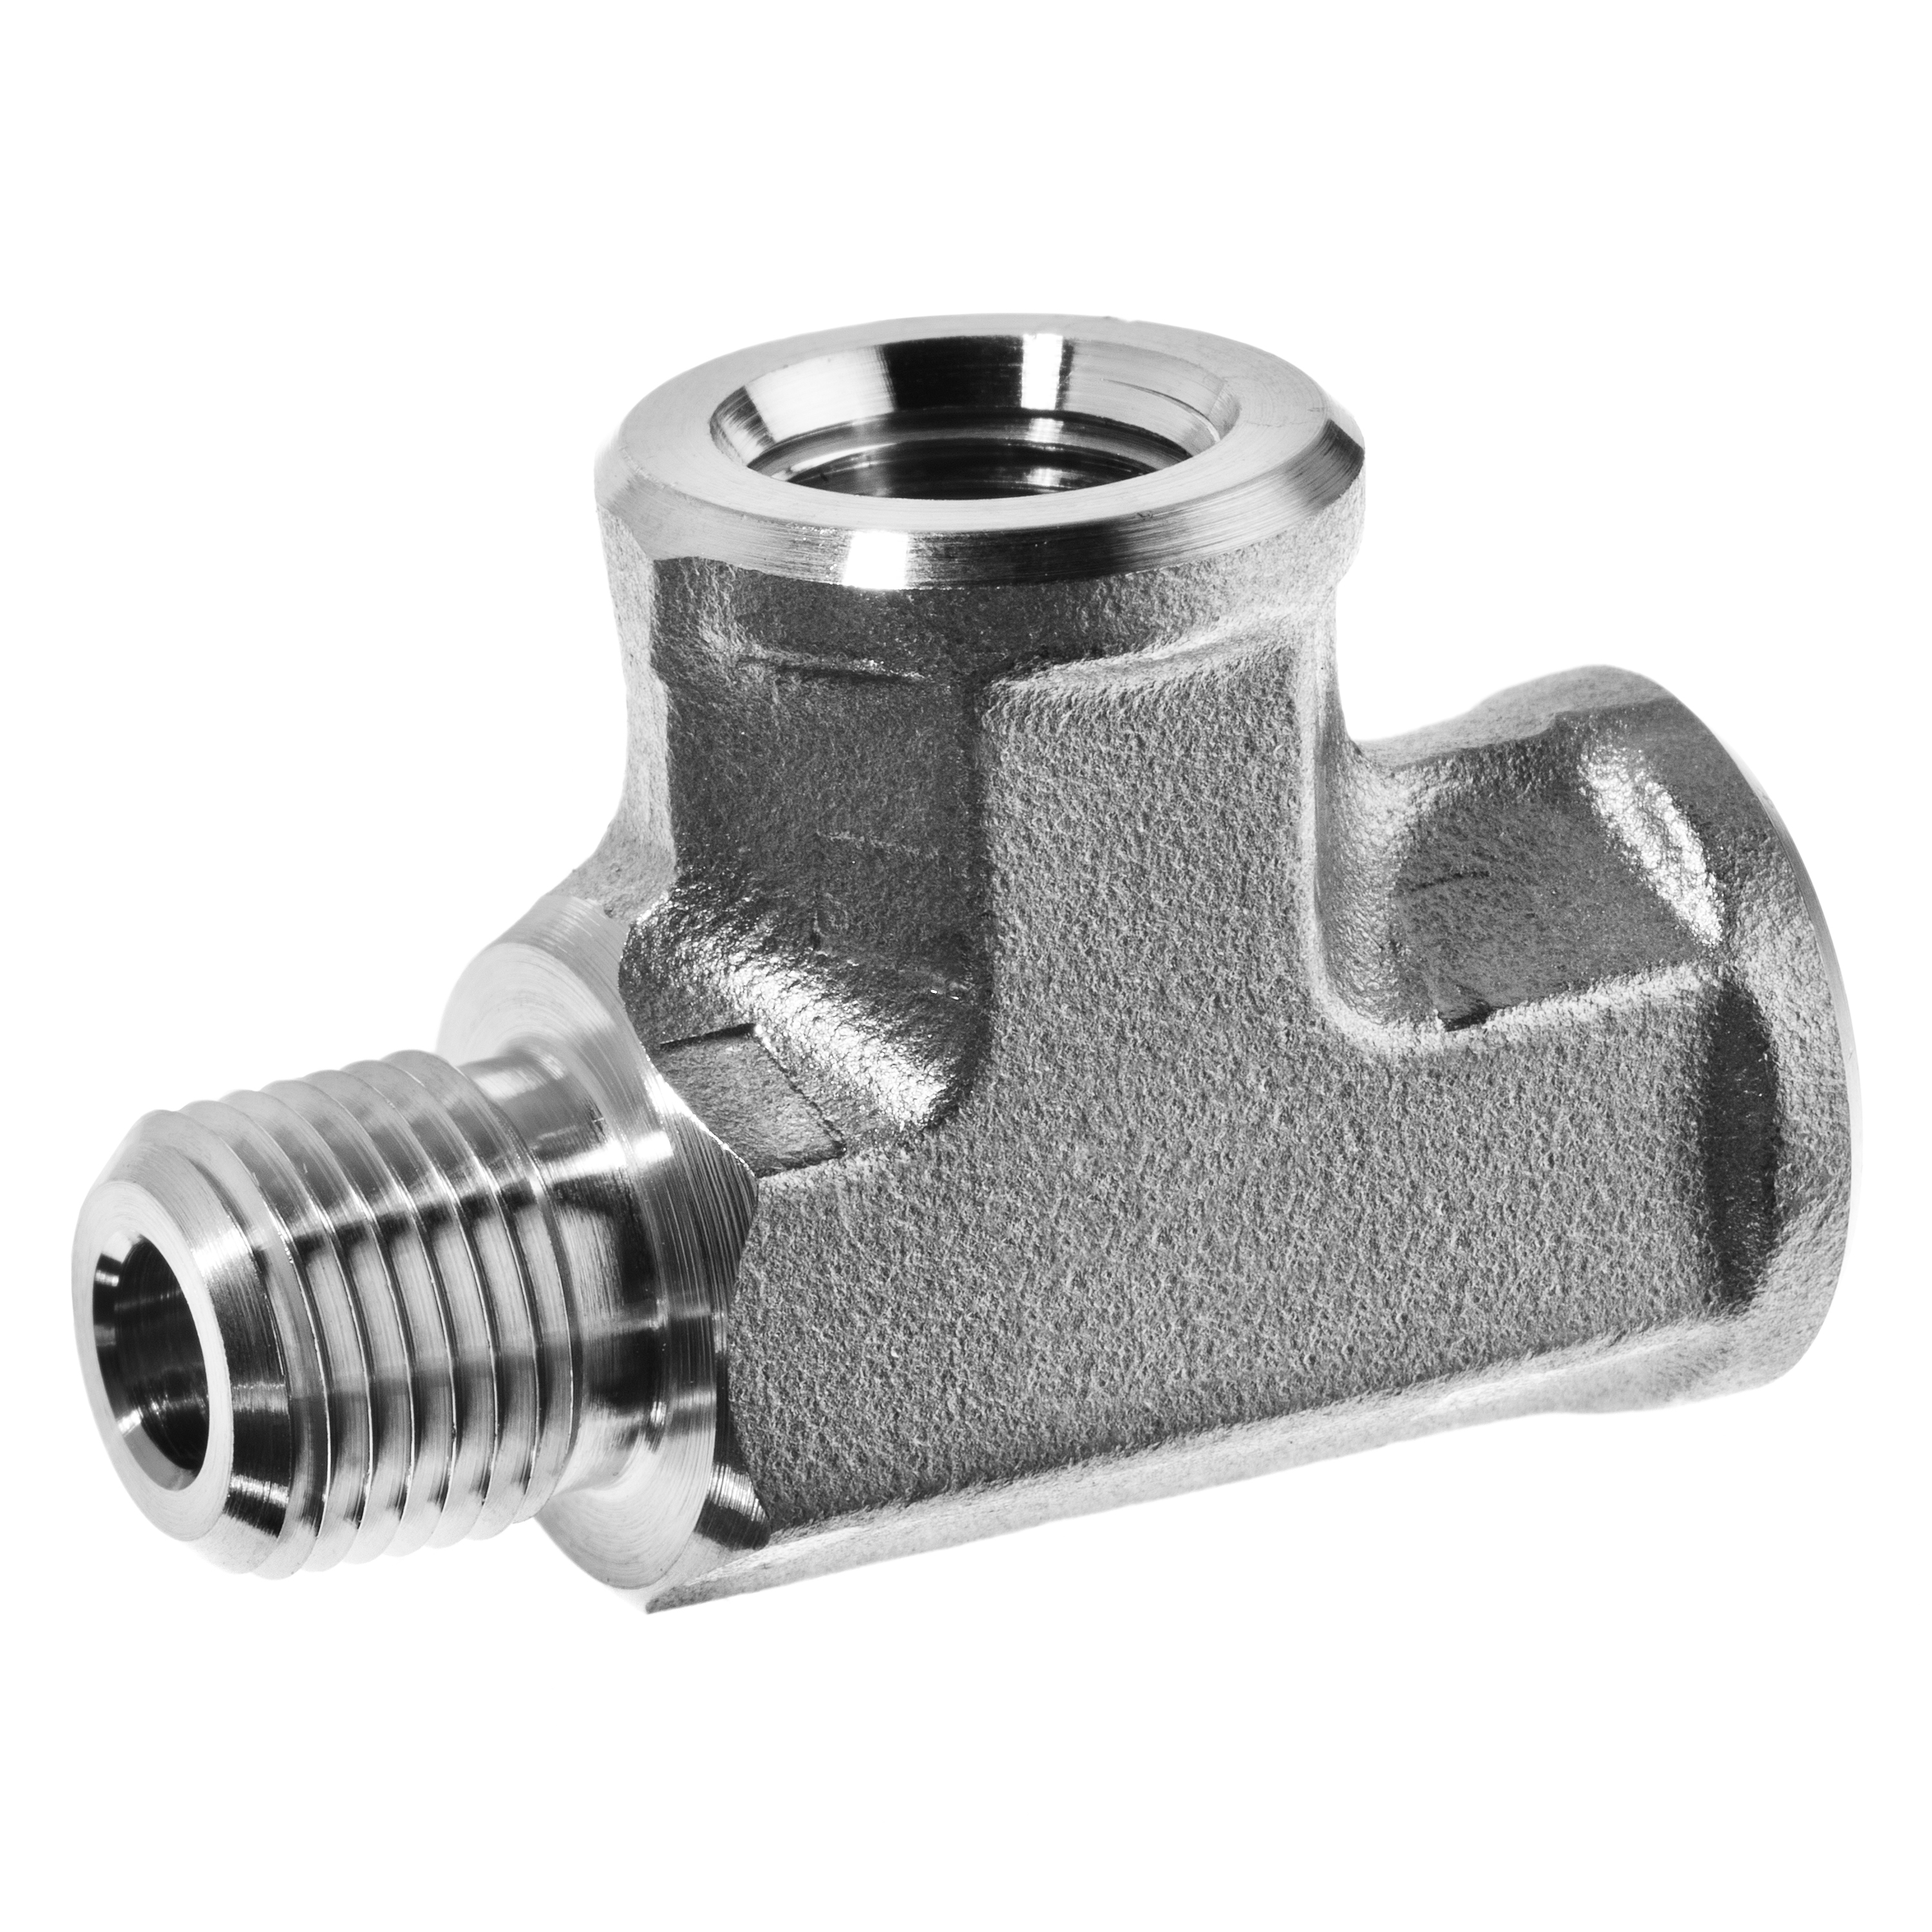 Pipe Fitting - Tee, Female BSPP, 304 Stainless Steel, Class 150